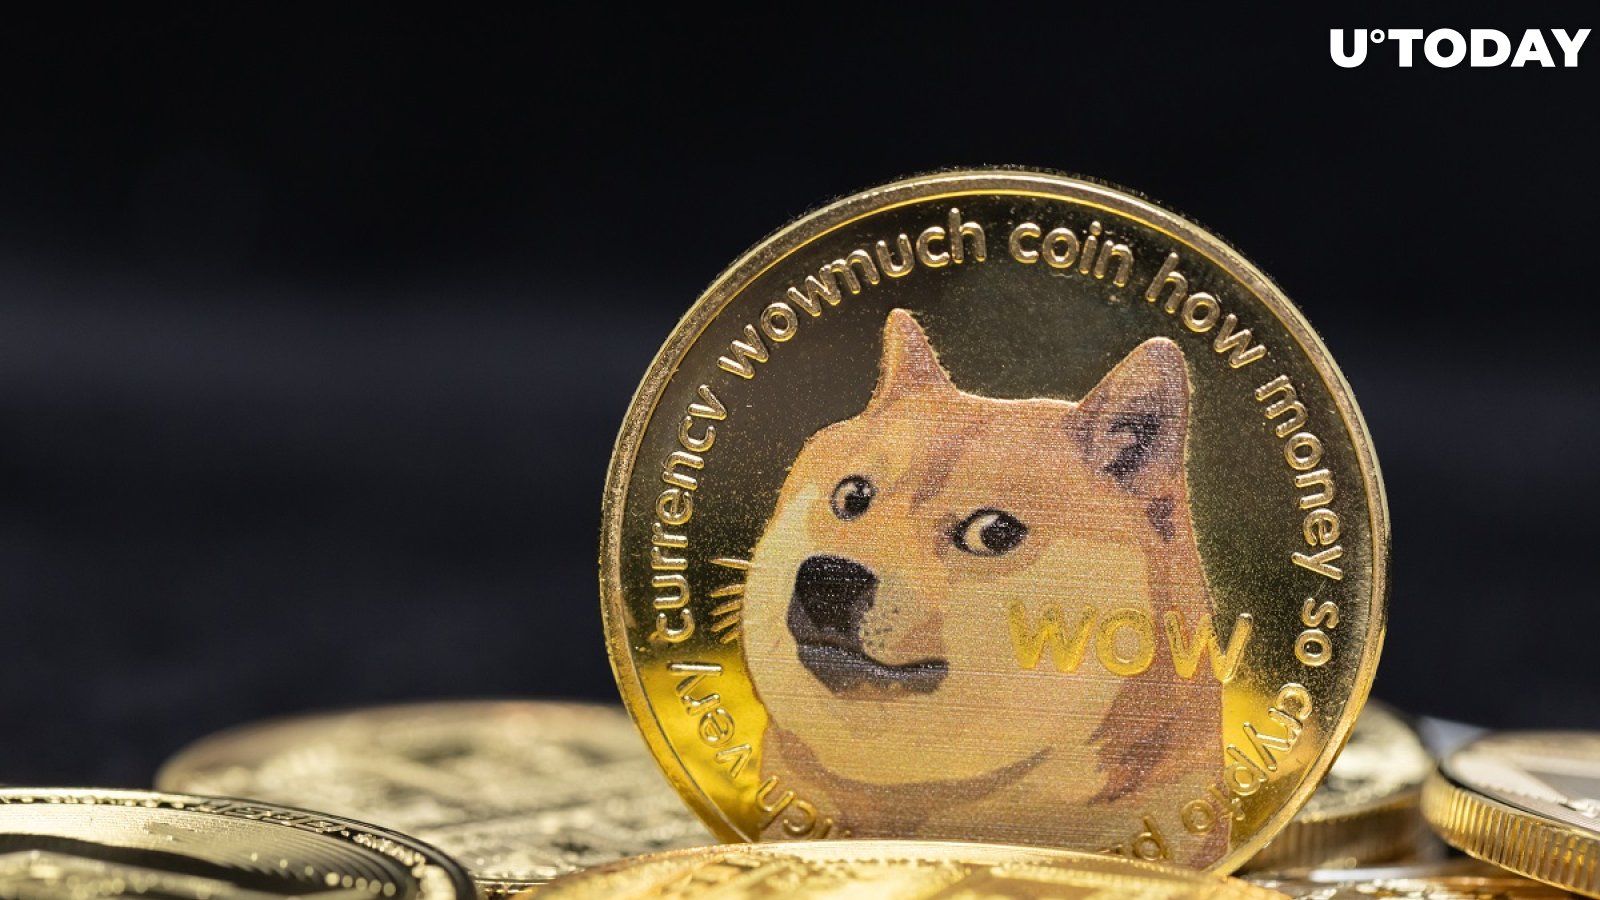 Dogecoin Fan Offers 10 Percent Discount on His House if Buyer Pays Him in DOGE